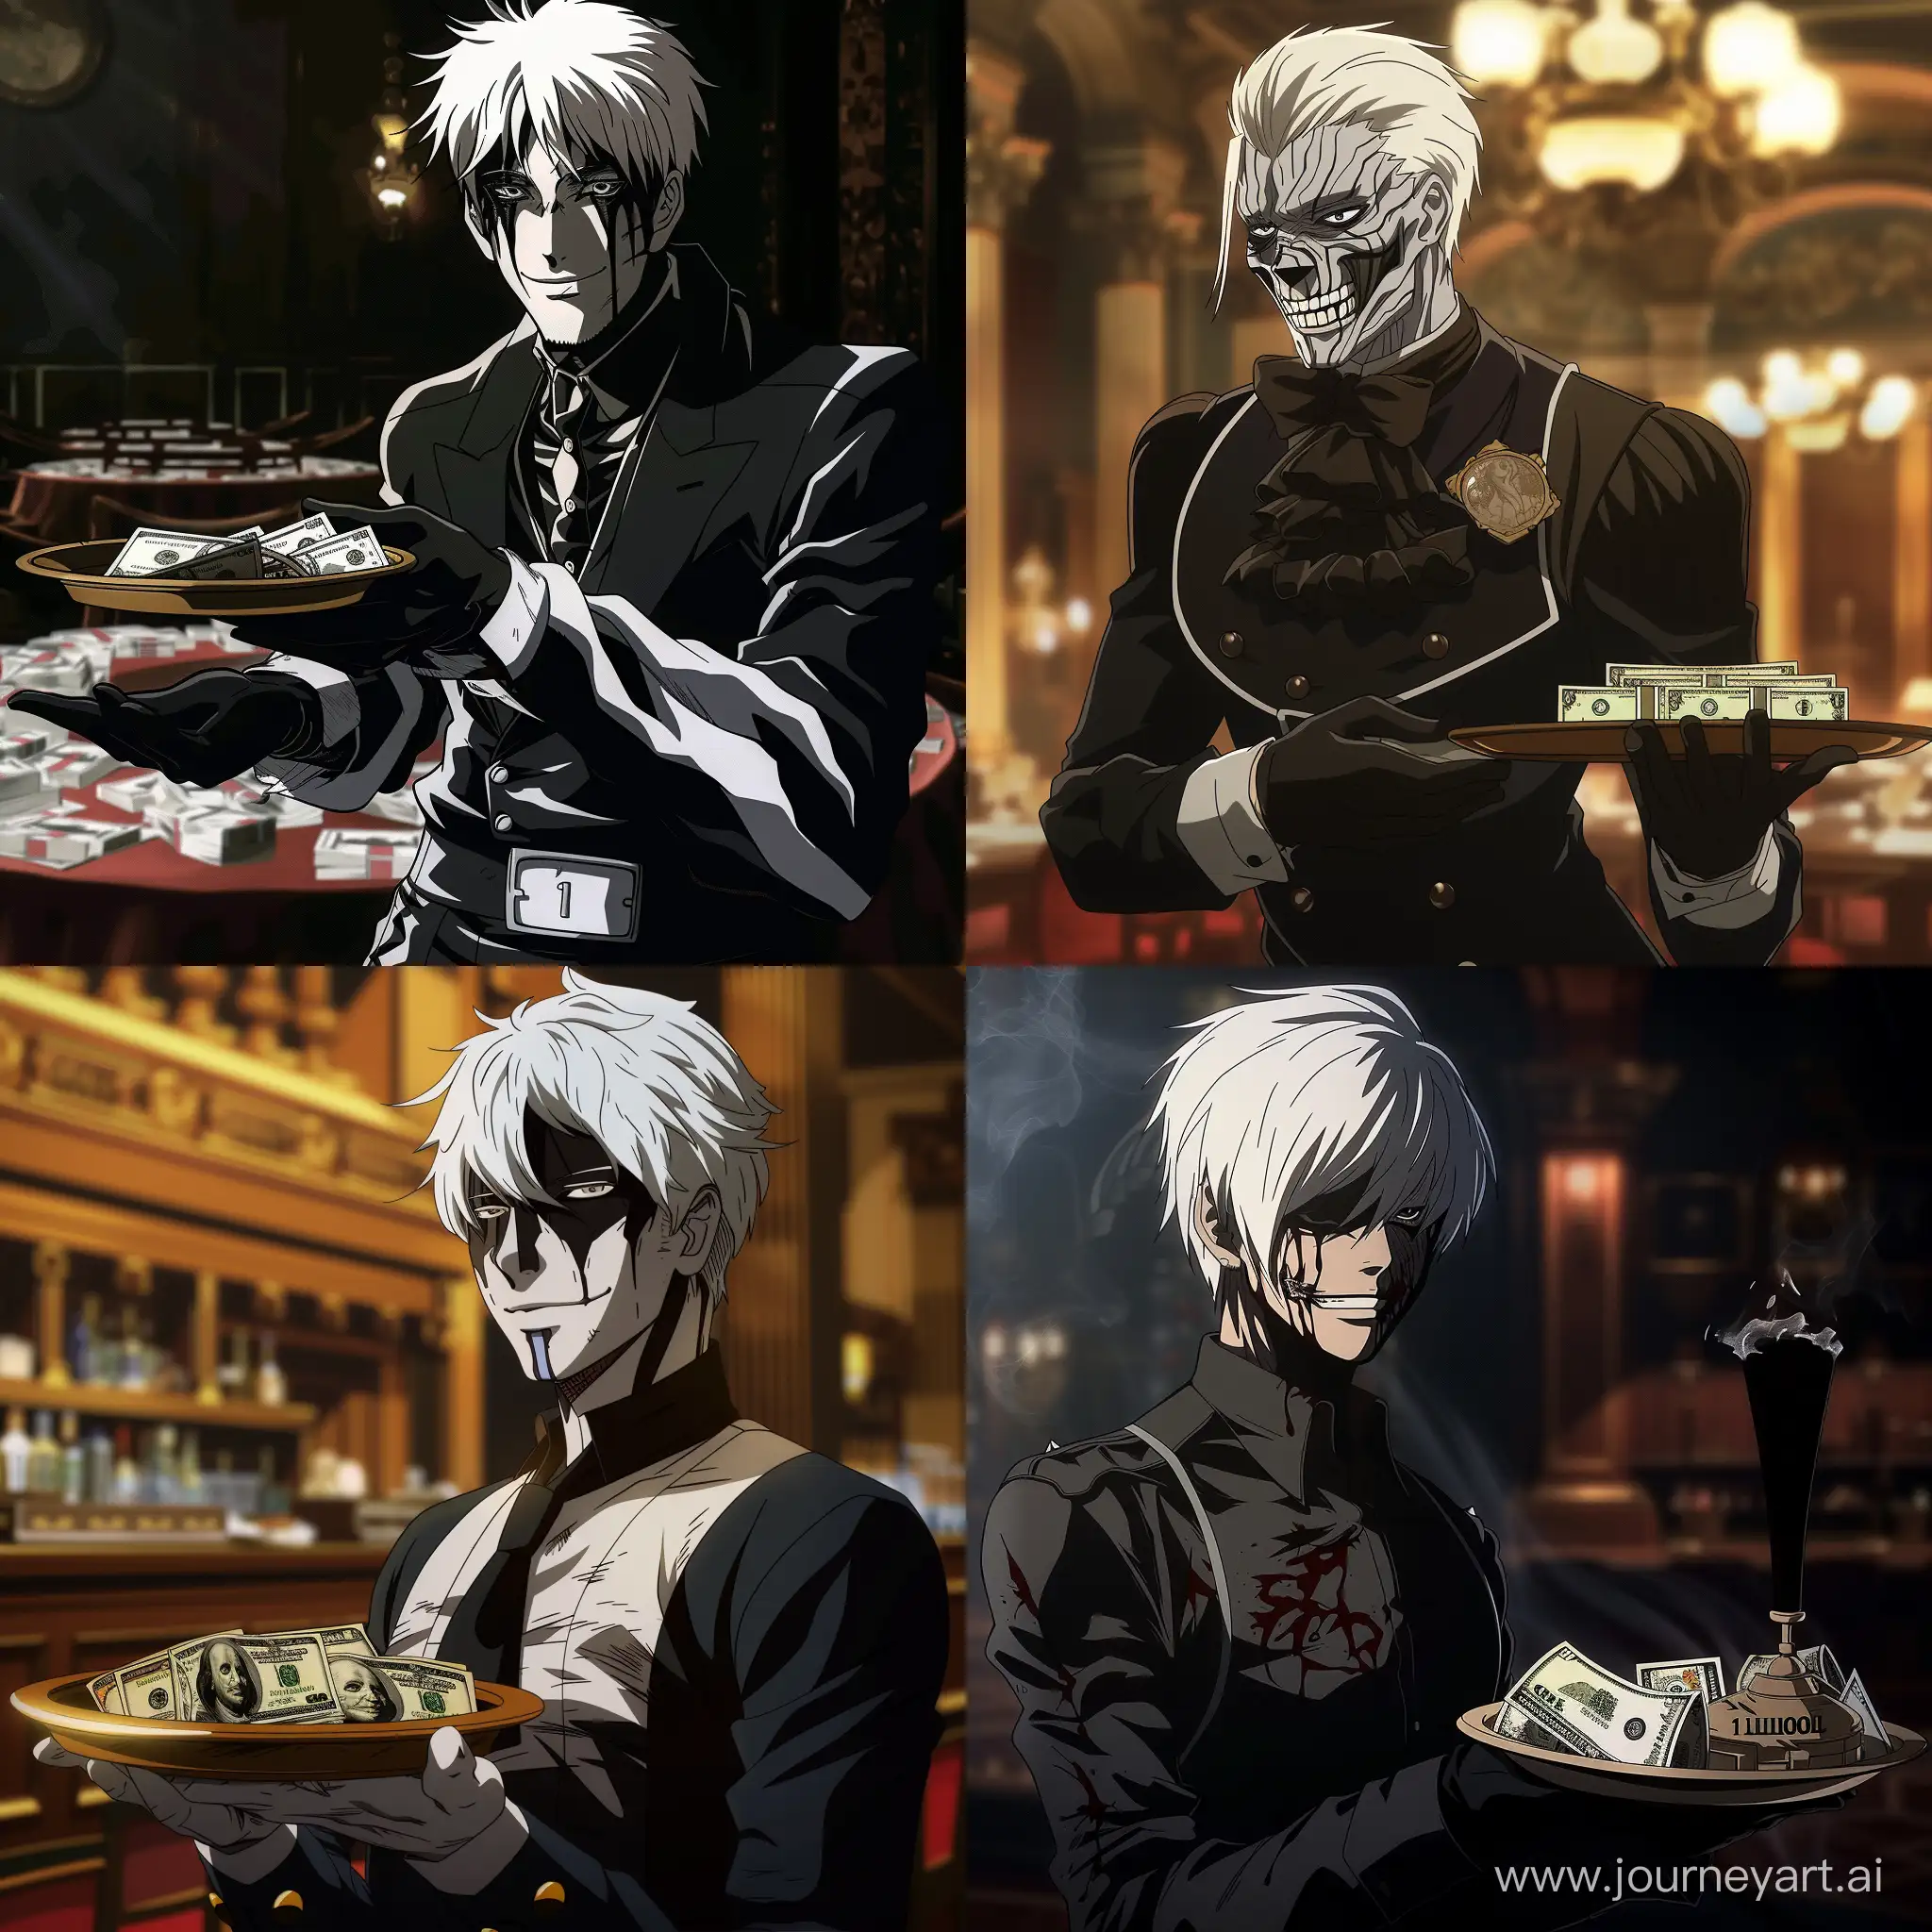 A  BUTLER IN berserk anime style , HE HAS WHITE HAIR AND BLACK SKIN, HE IS HOLDING A SERVING TRAY OF MONEY 1 MILLION DOLLARS.